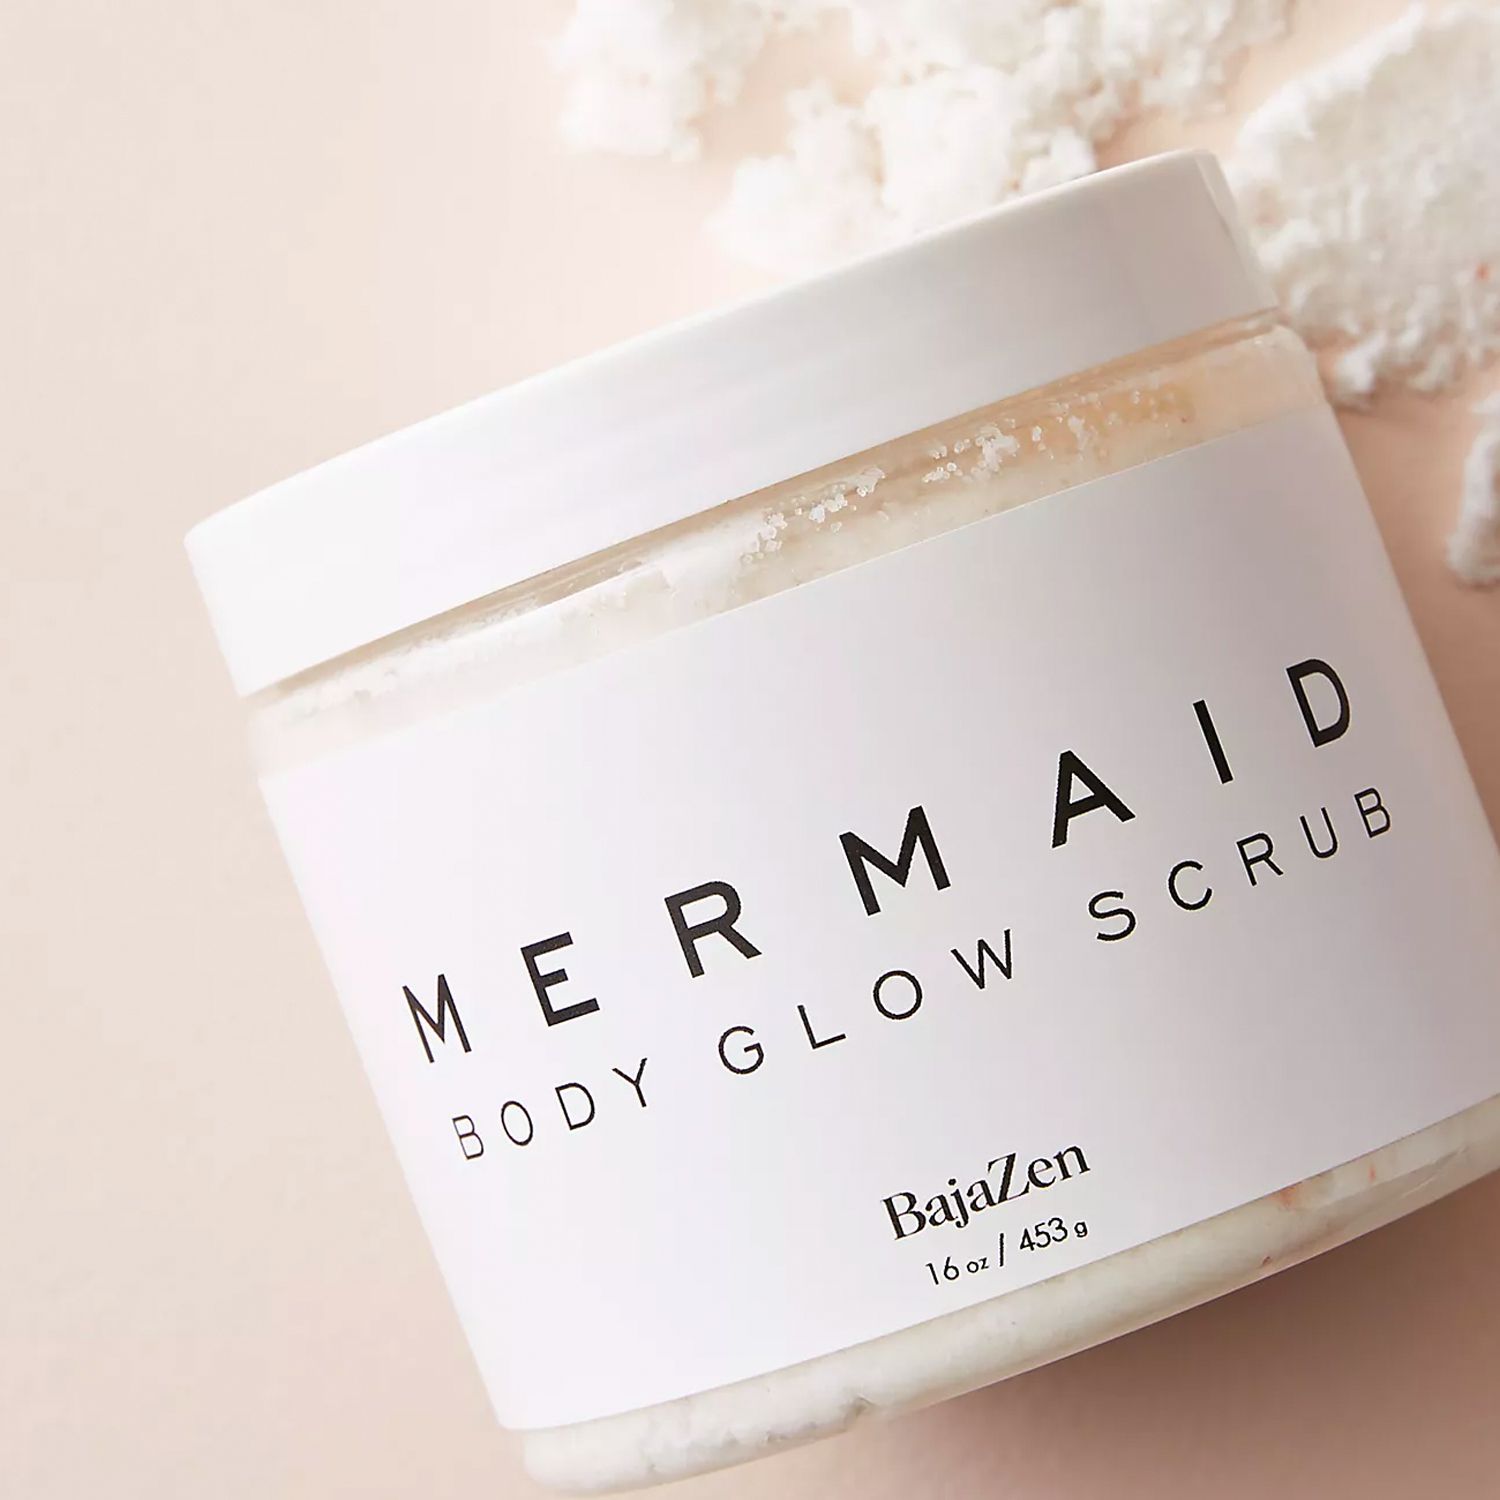 <p>Sure, sending your bestie to an actual spa may be a stretch for your pocketbook, but sending a tub of this scrub is nearly as om-inspiring. It has Himalayan pink salt and granulated sugar to exfoliate, coconut and almond oil to moisturize, and a delicate scent that will help her relax come bath time.</p>
                            